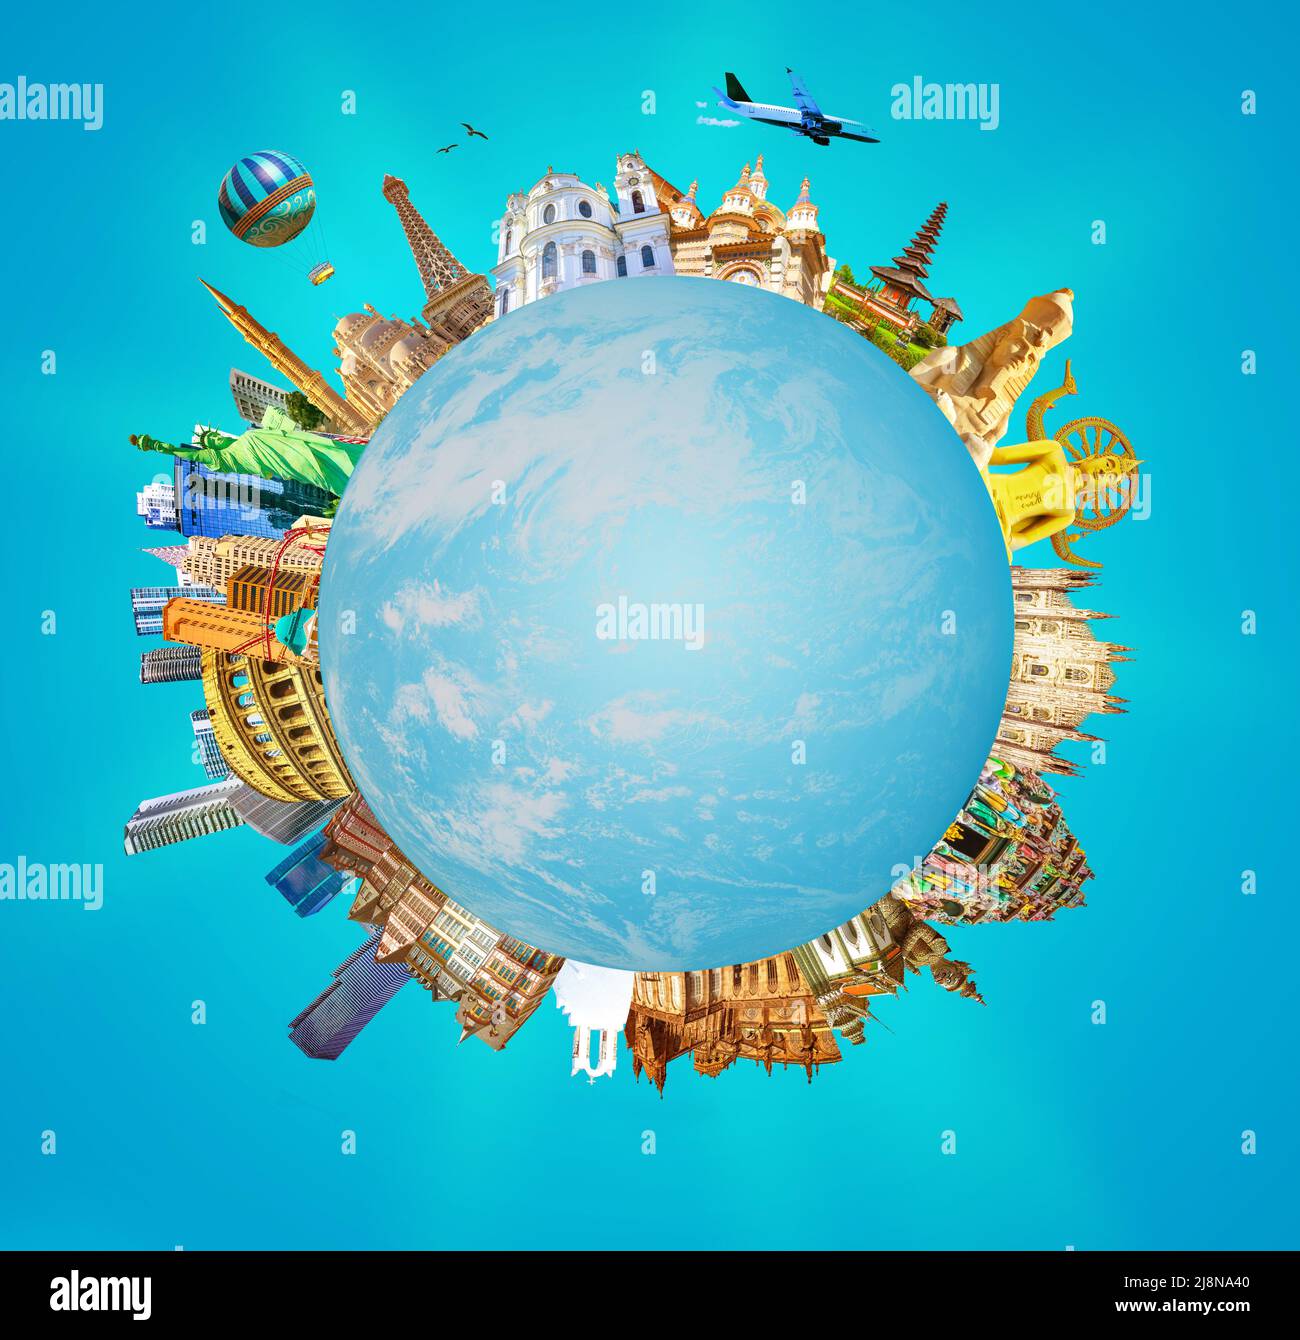 World religious and architecture monuments - collage or globe from different religions. Conceptual image of world ocean as a planet in space. Environmental protection concept. Underwater world. Stock Photo